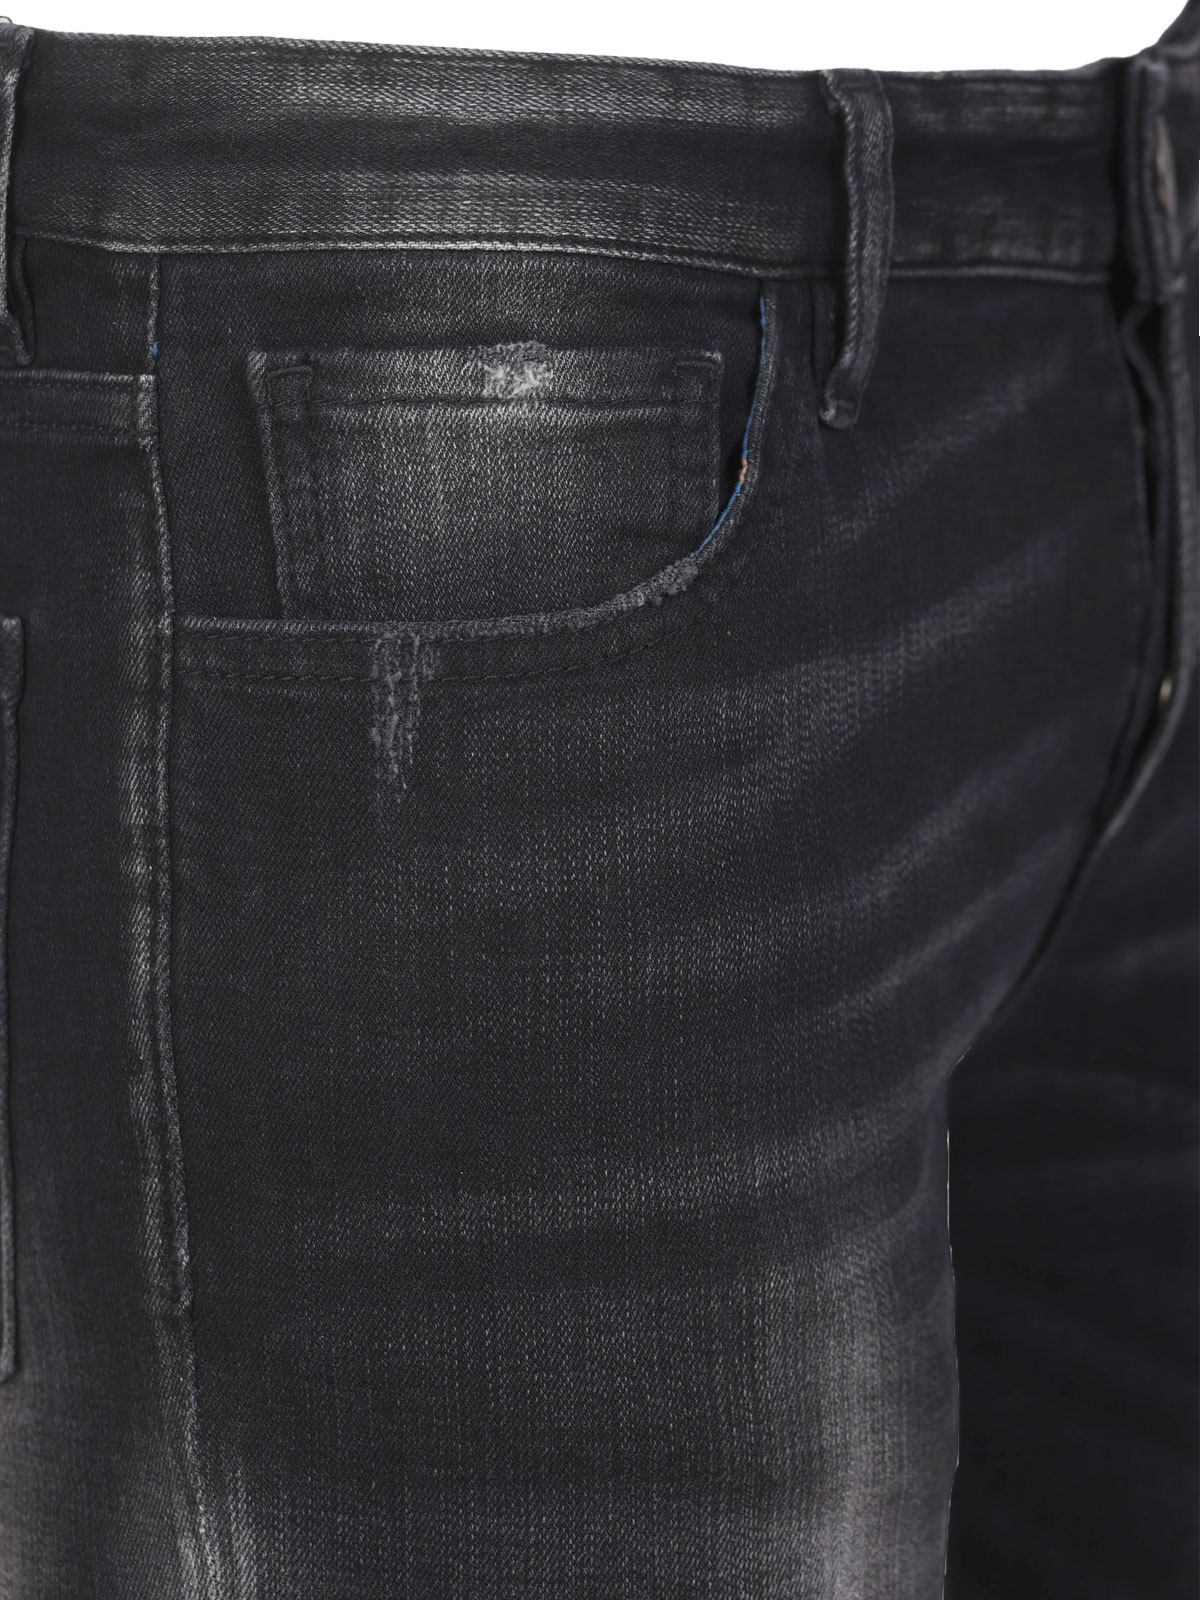 Mens jeans in black with a ripped effect - 62175 € 78.18 img3